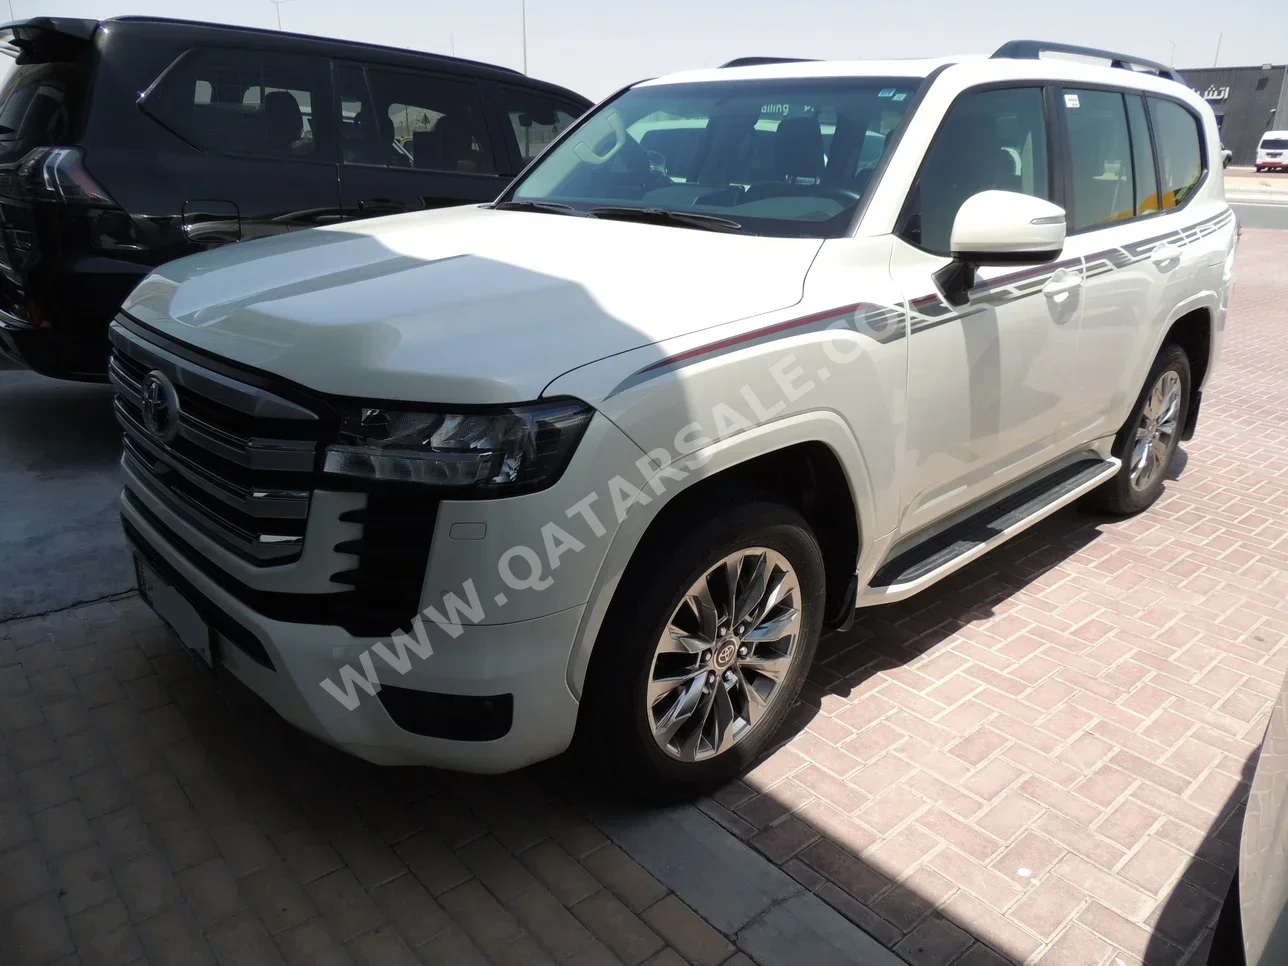 Toyota  Land Cruiser  GXR Twin Turbo  2023  Automatic  13,000 Km  6 Cylinder  Four Wheel Drive (4WD)  SUV  White  With Warranty